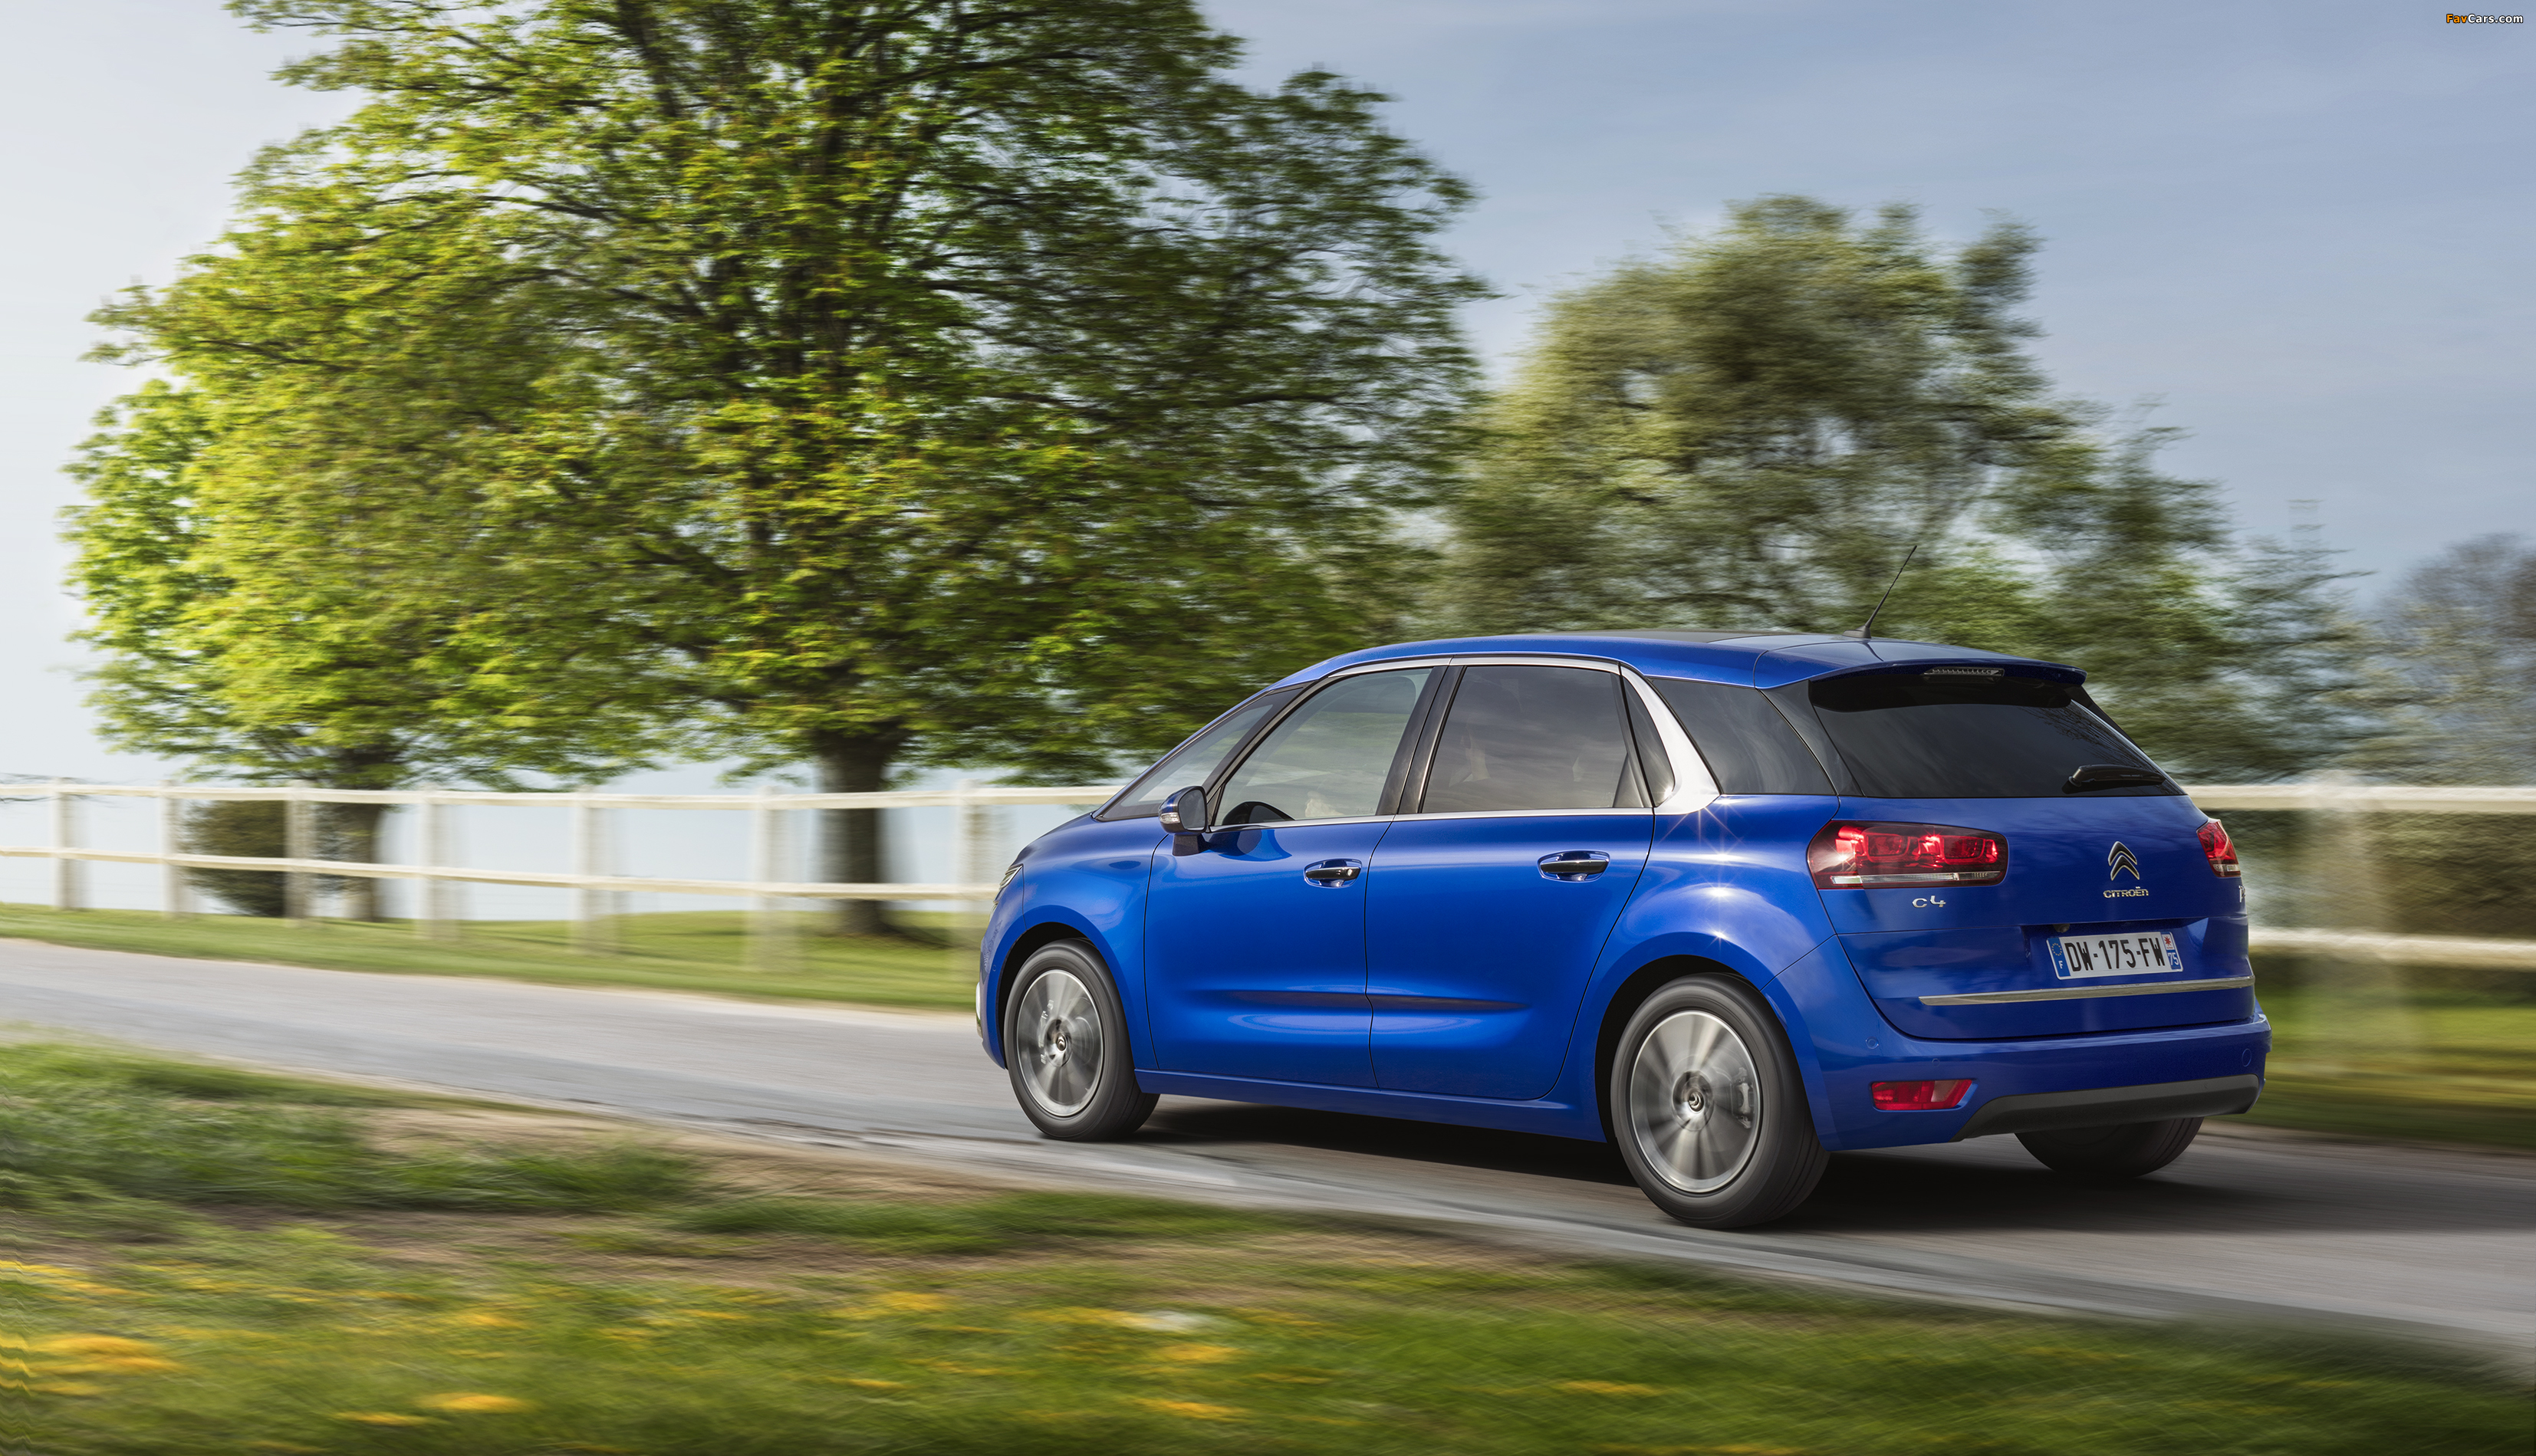 Pictures of Citroën C4 Picasso 2016 (3307 x 1899)